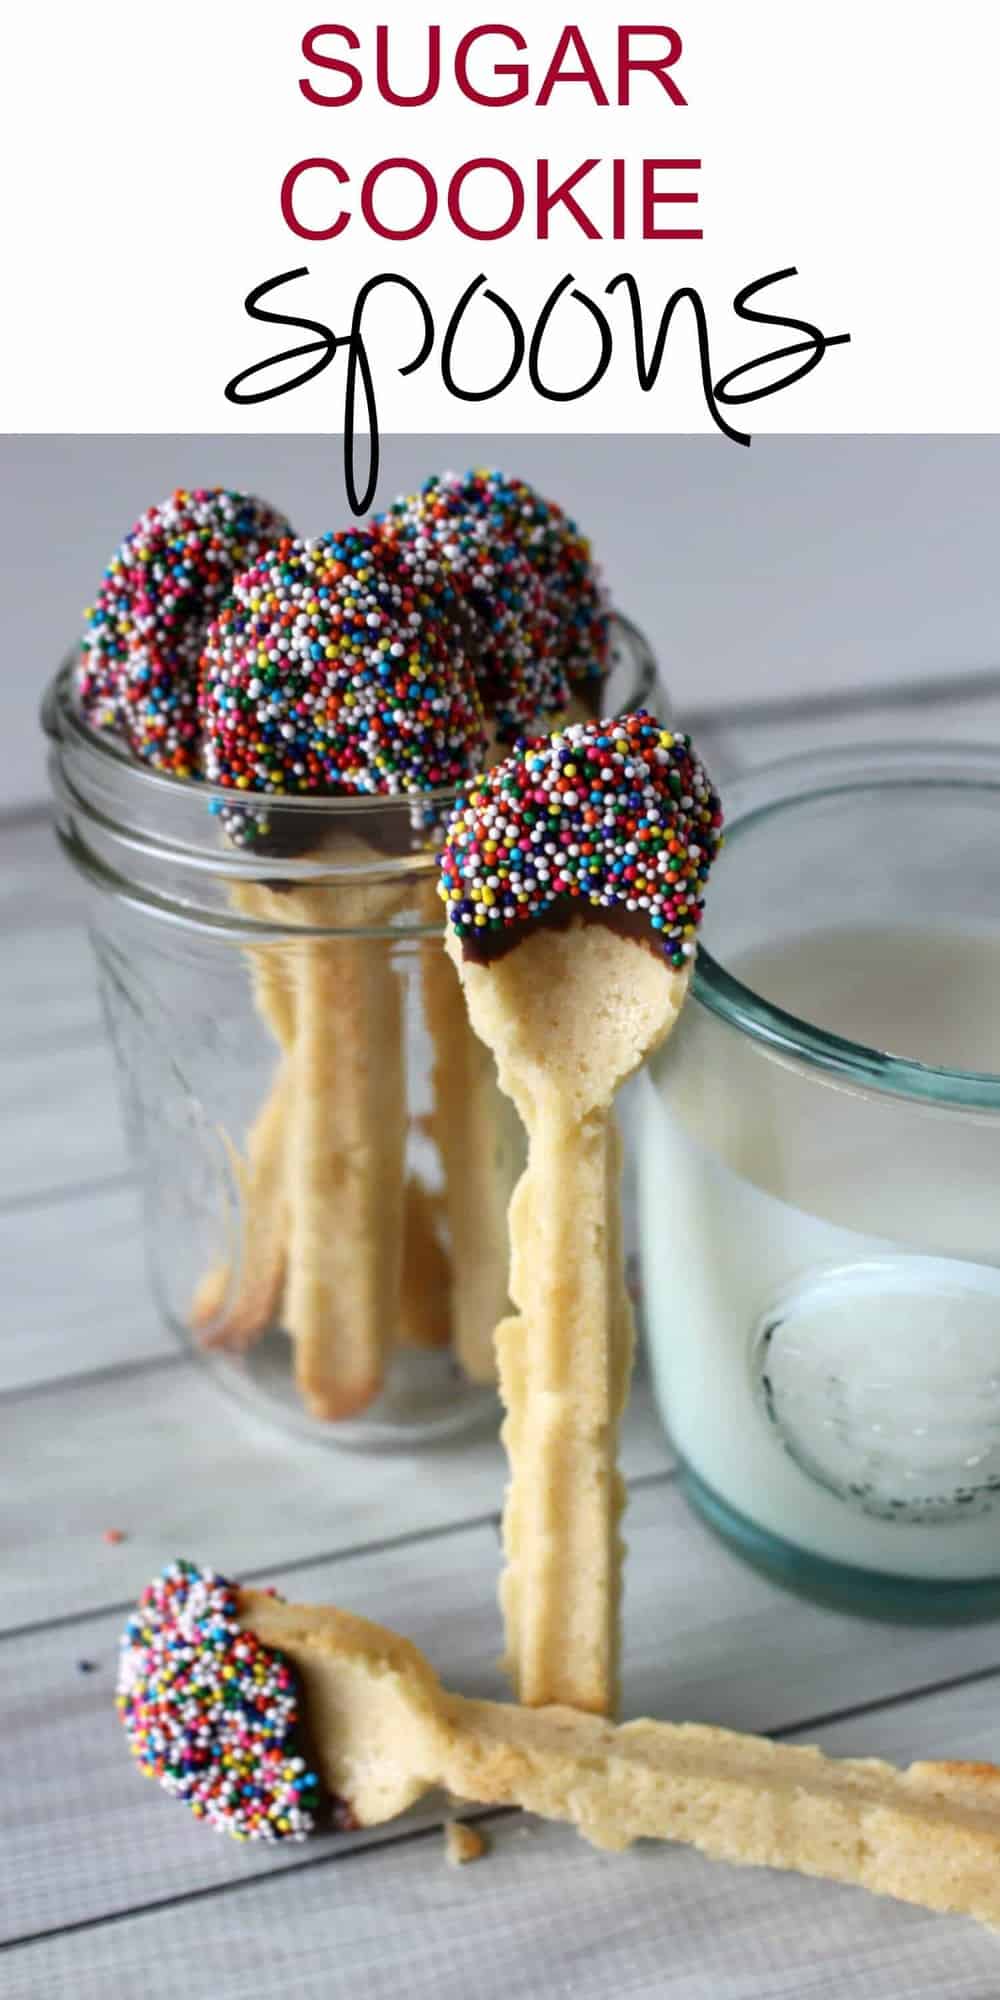 Sugar Cookie Spoons from Princess Pinky Girl - taking milk and cookies to a whole other level